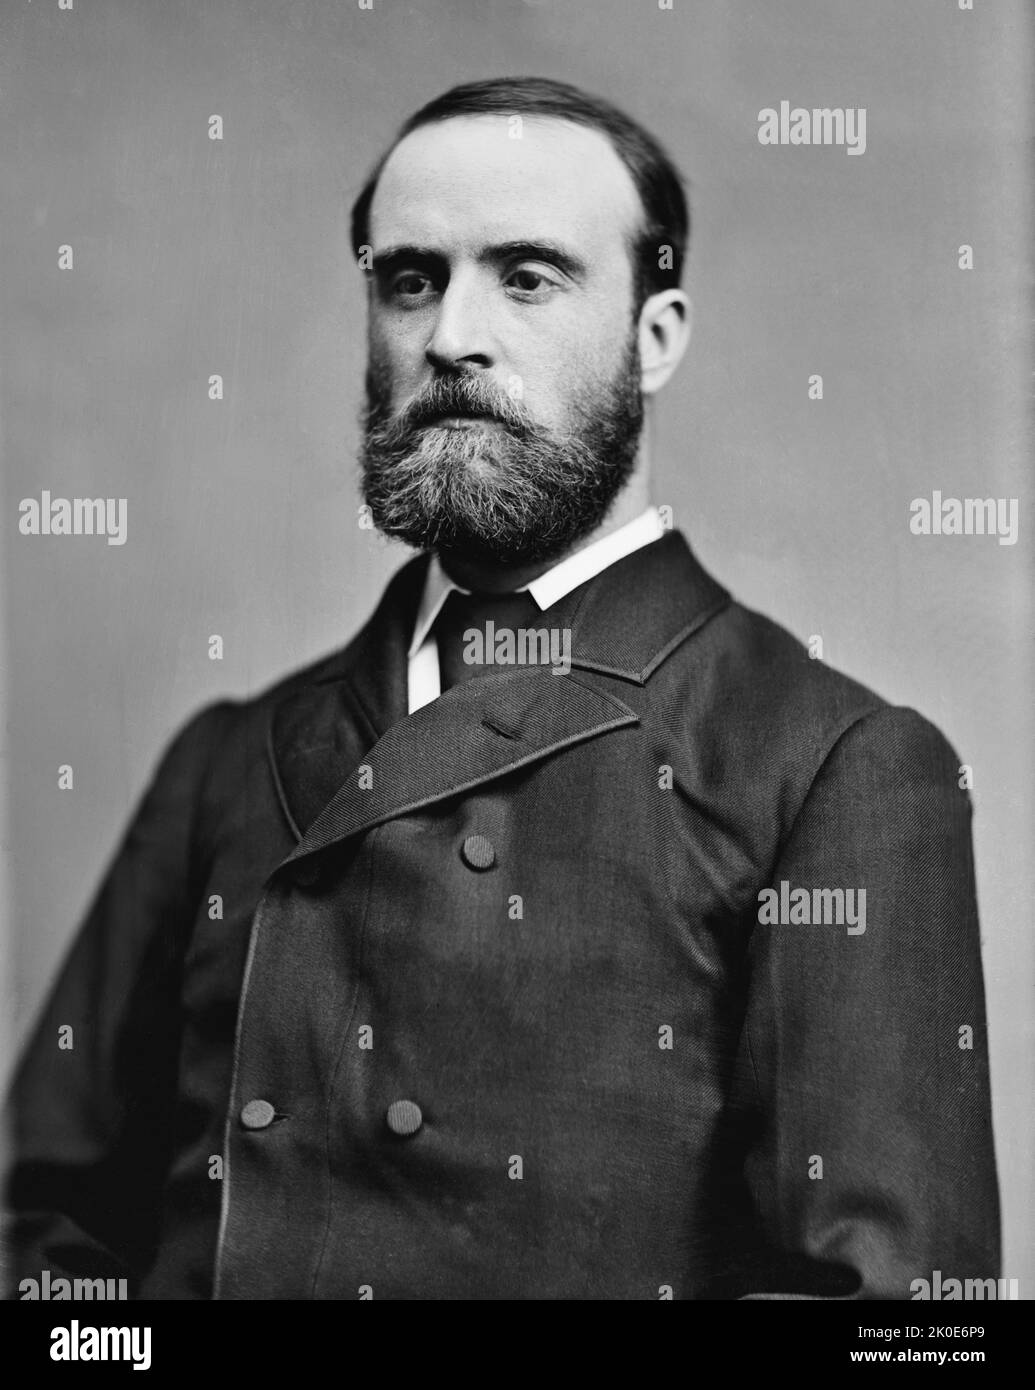 Charles Stewart Parnell (1846 - 1891) Irish nationalist politician who served as a Member of Parliament (MP) from 1875 to 1891, also acting as Leader of the Home Rule League from 1880 to 1882 and then Leader of the Irish Parliamentary Party from 1882 to 1891. Stock Photo